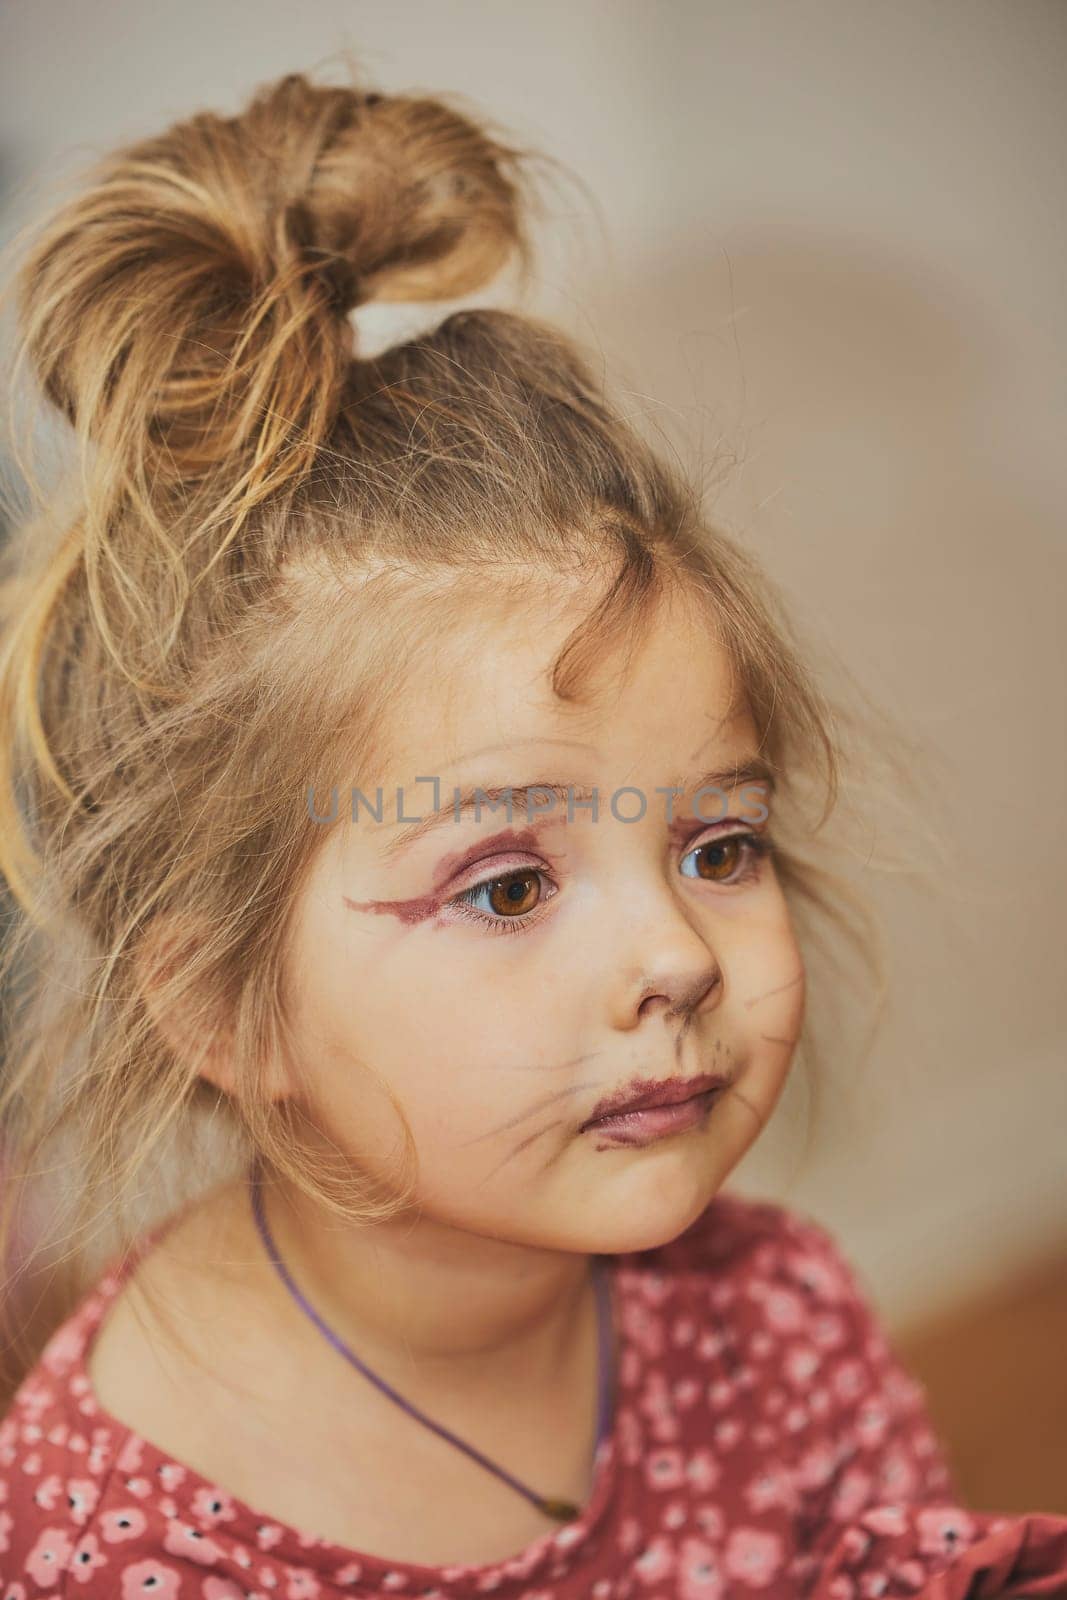 Charming child made makeup with felt-tip pens at home by Viktor_Osypenko